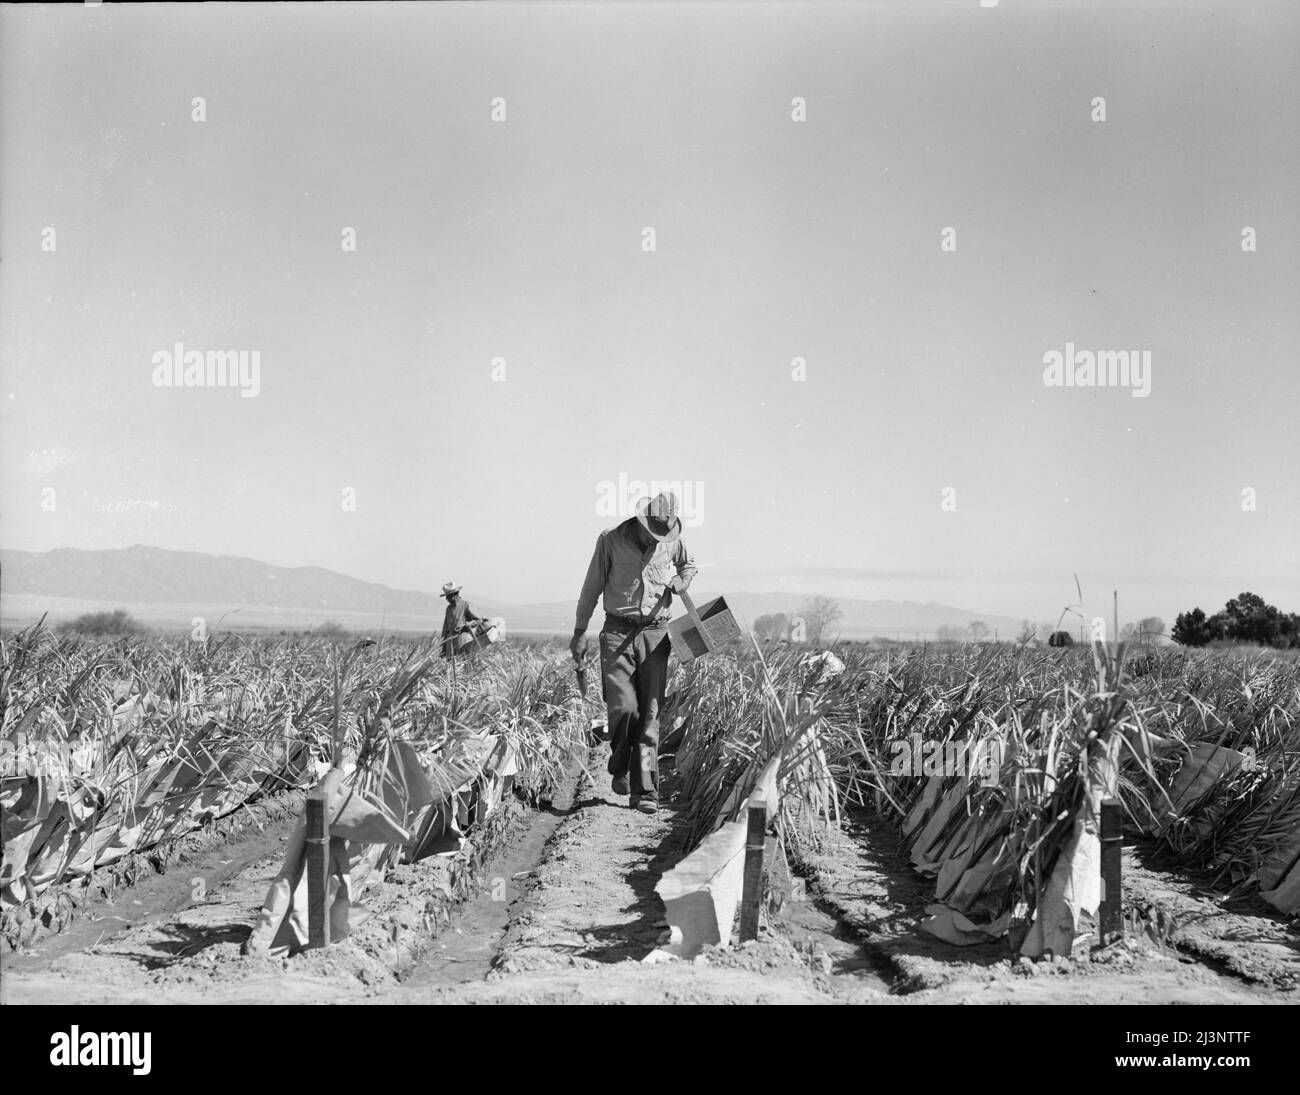 Desert agriculture. Brushed chili field. Replanting chili plants on a Japanese-owned ranch. Sticks, palm leaves and paper are used for protection against wind and cold. Tomato plants are cultivated by the same method. Imperial Valley, California. Stock Photo